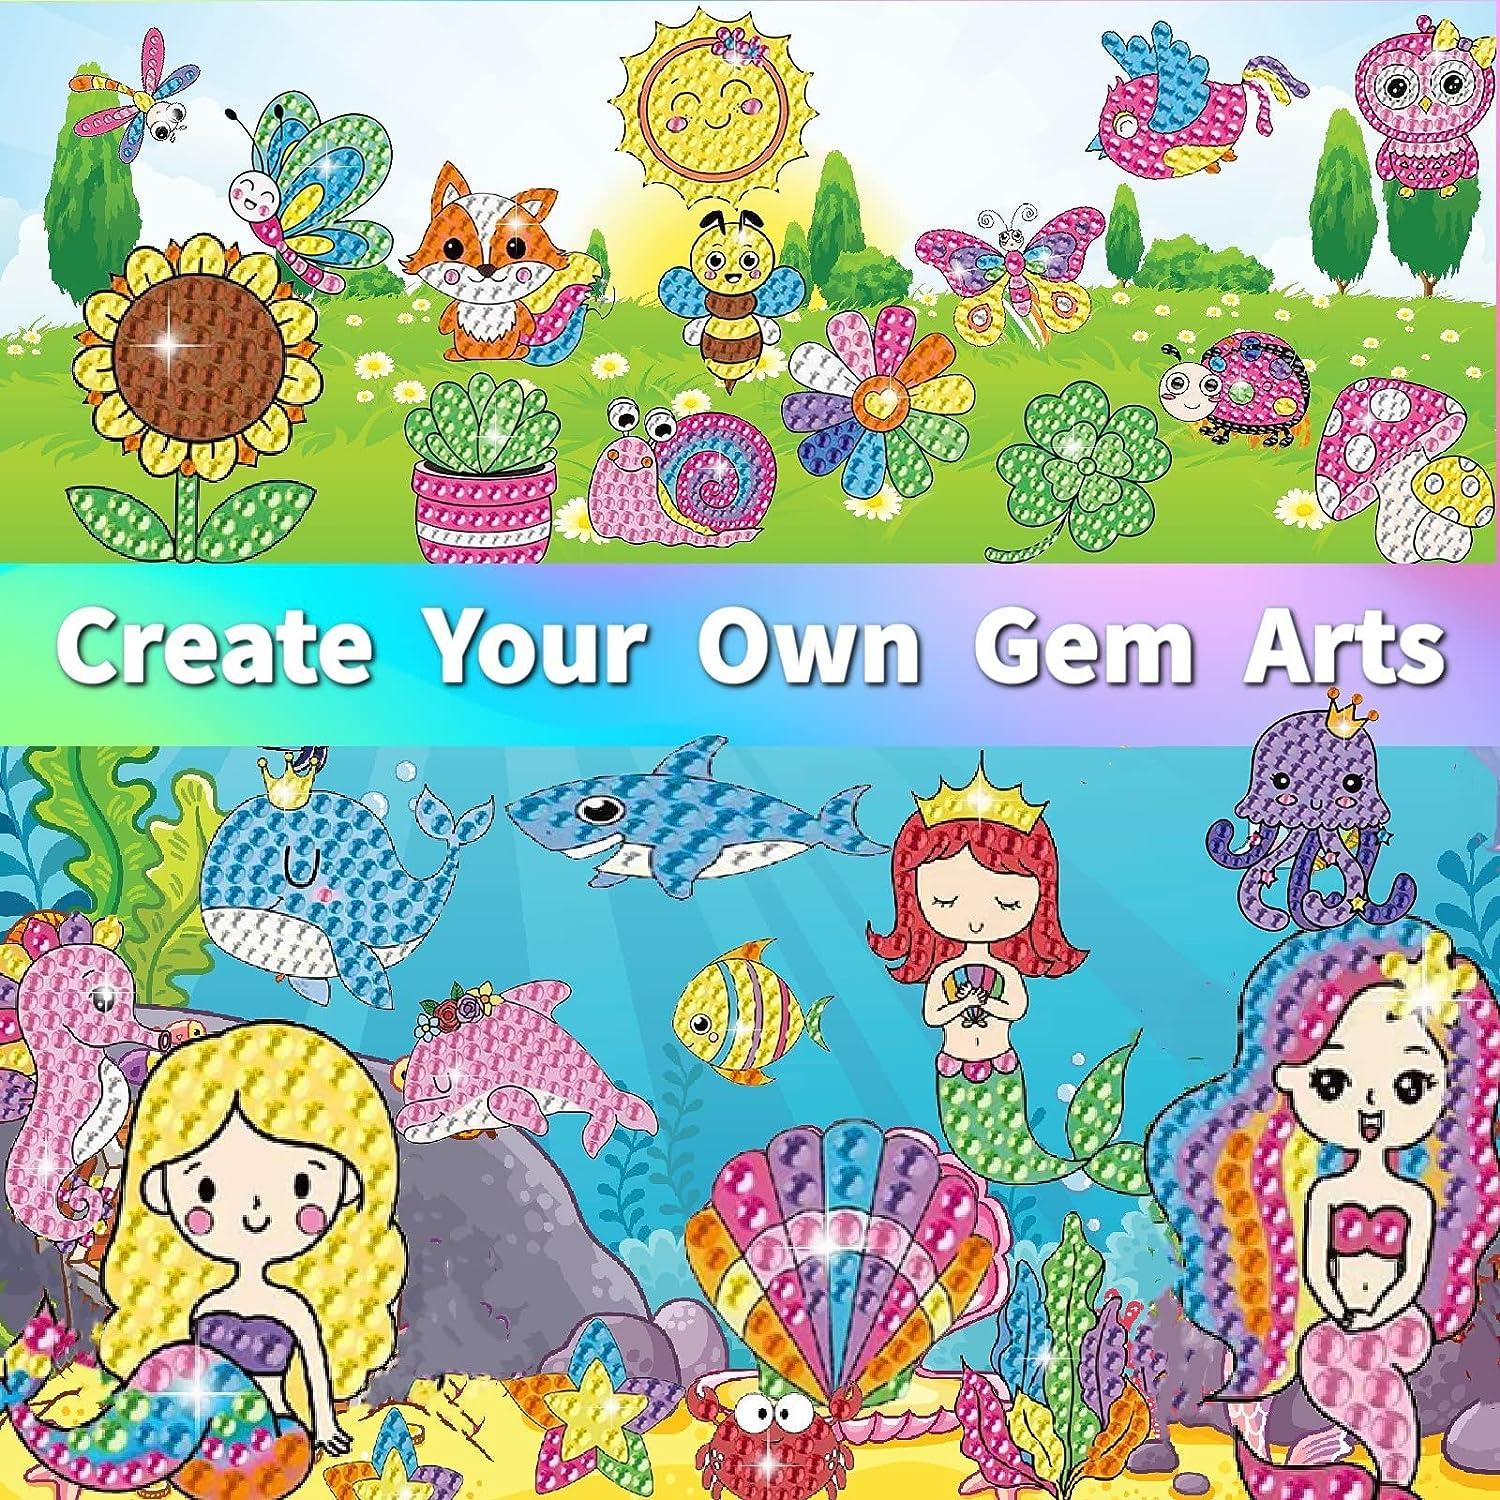 Diamond Art for Kids, Crafts for Girls Ages 8-12, Gem Arts and